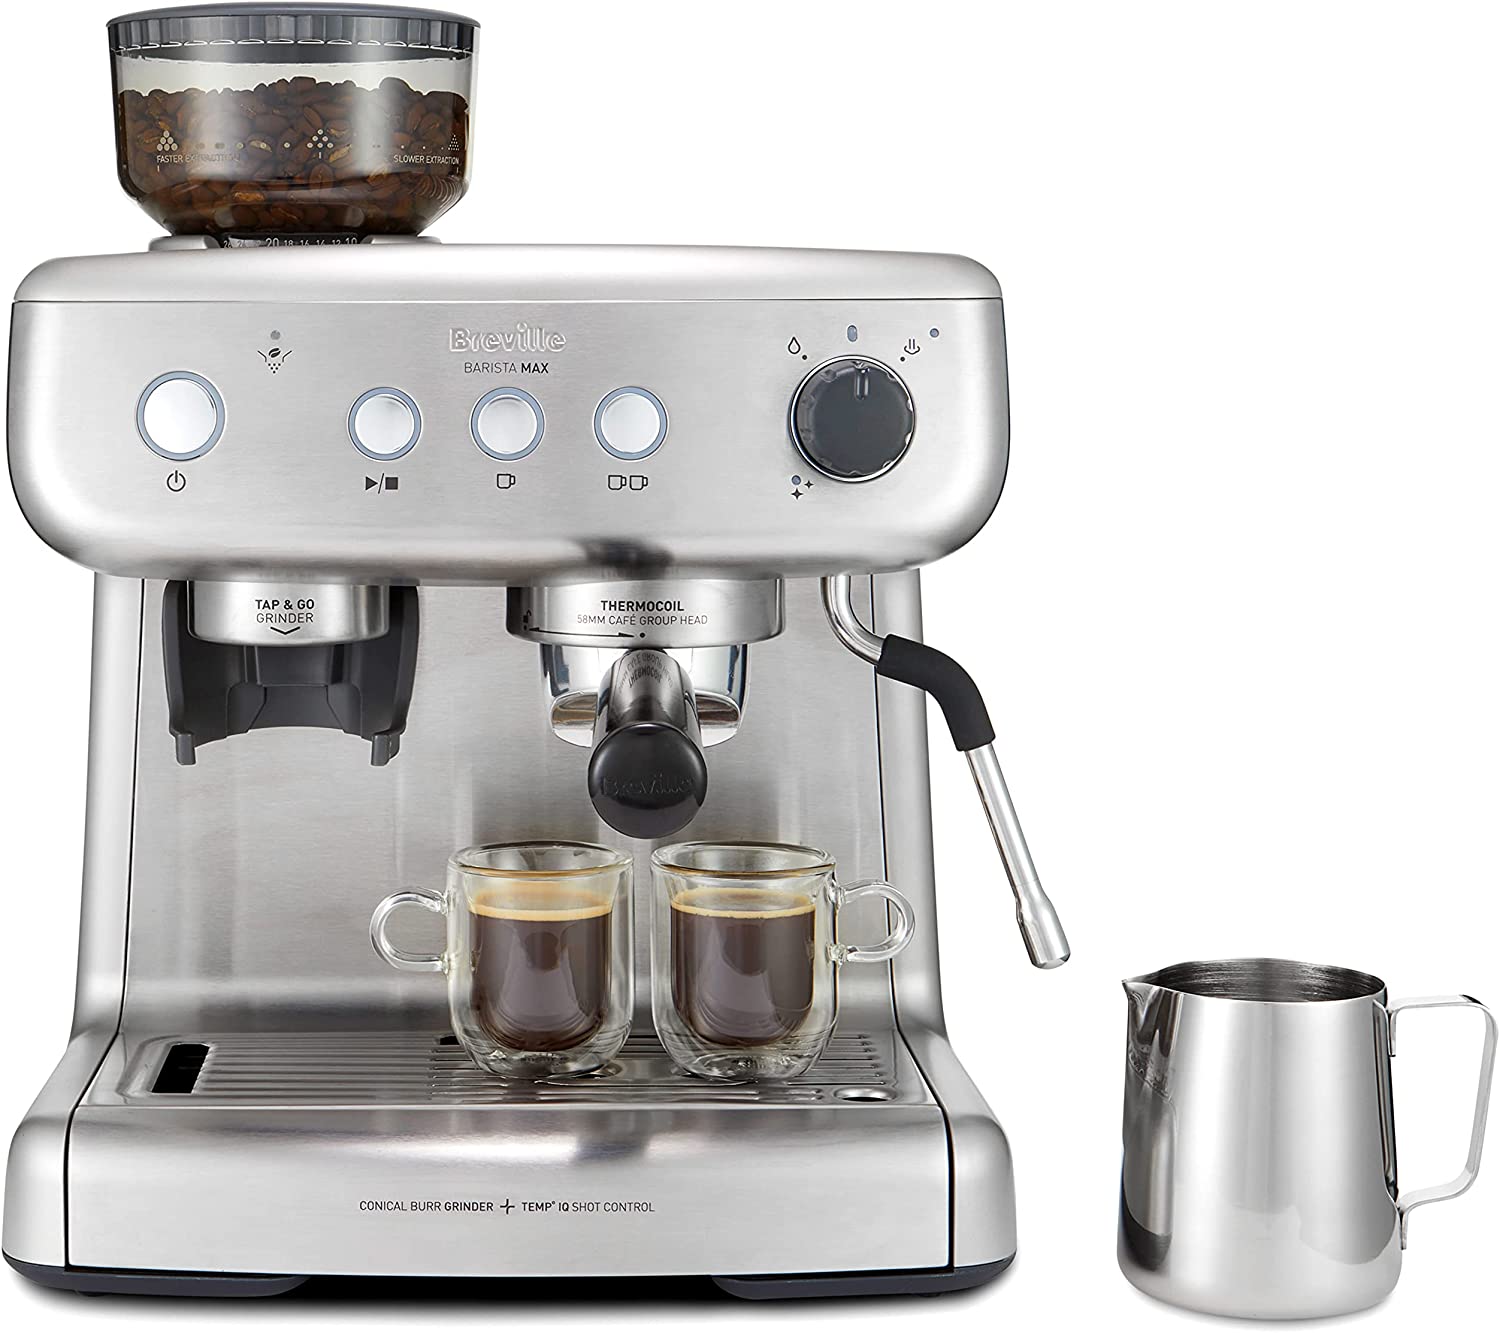 Breville Barista Max product image